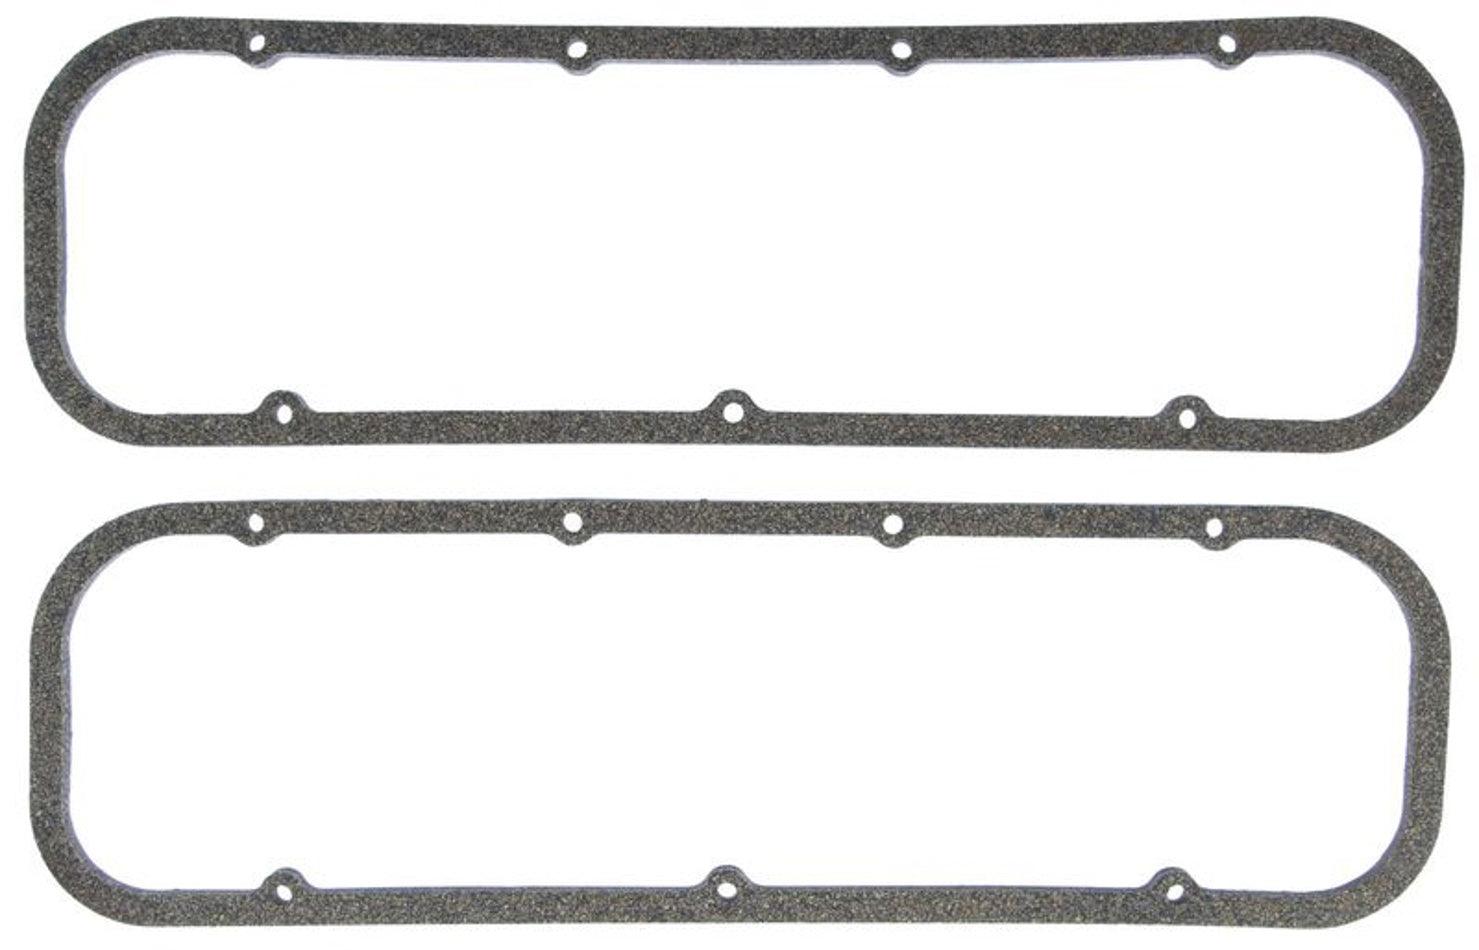 Valve Cover Gasket Set BBC .250 Thick - Burlile Performance Products